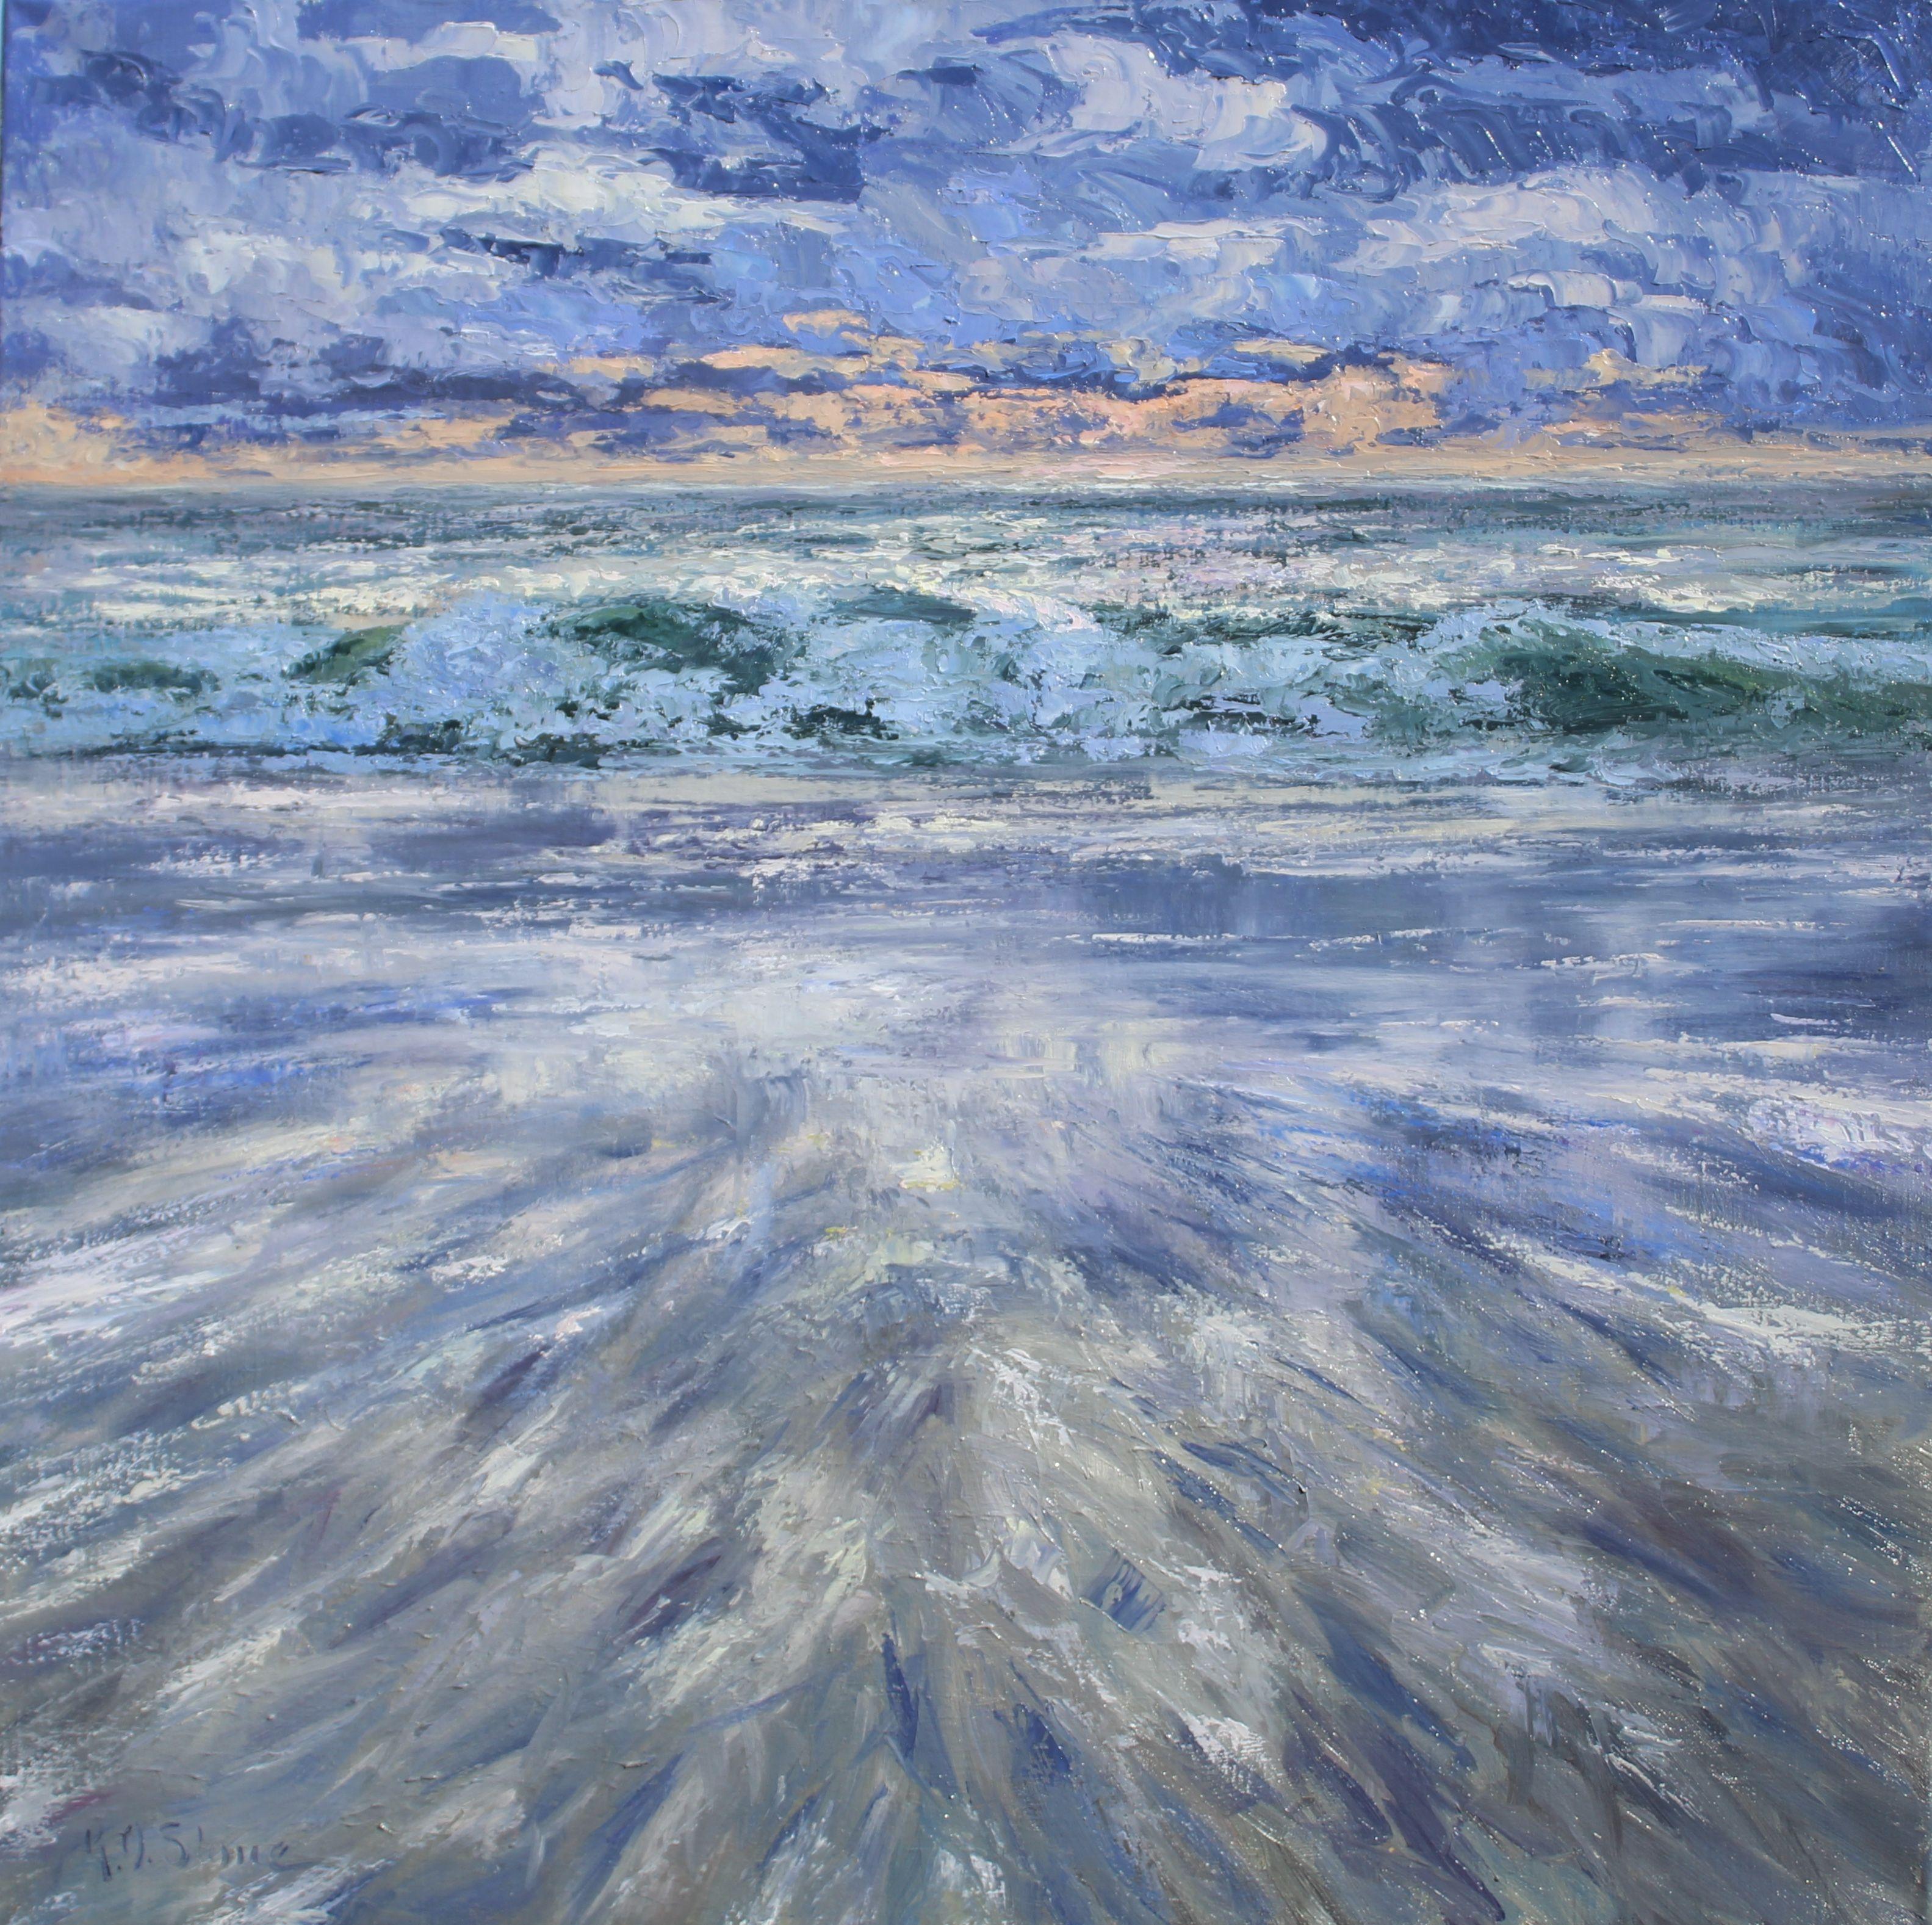 A meditative original palette knife seascape painting of an early morning at the ocean.  I came upon this scene one morning, a storm had just passed and the sun was reappearing among the clouds and just above the horizon, the gently rolling waves